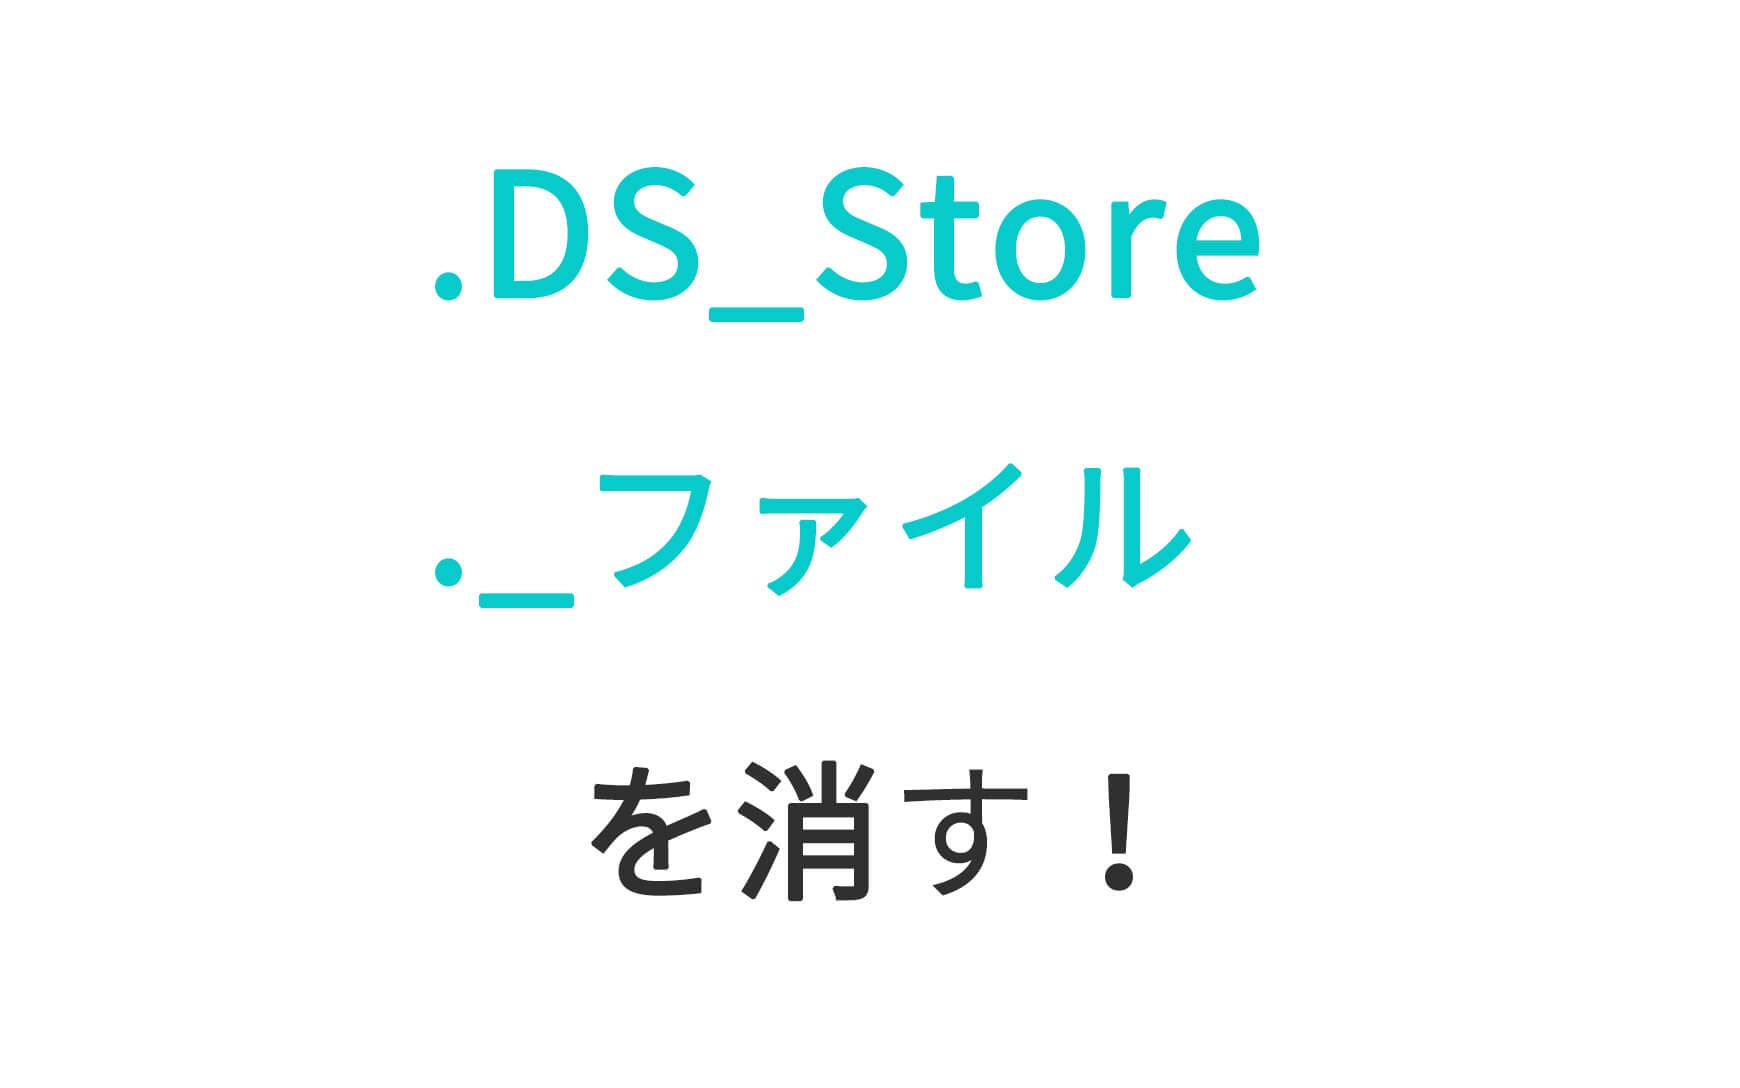 .DS_Storeや._ ファイル（リソースフォーク）を消す方法